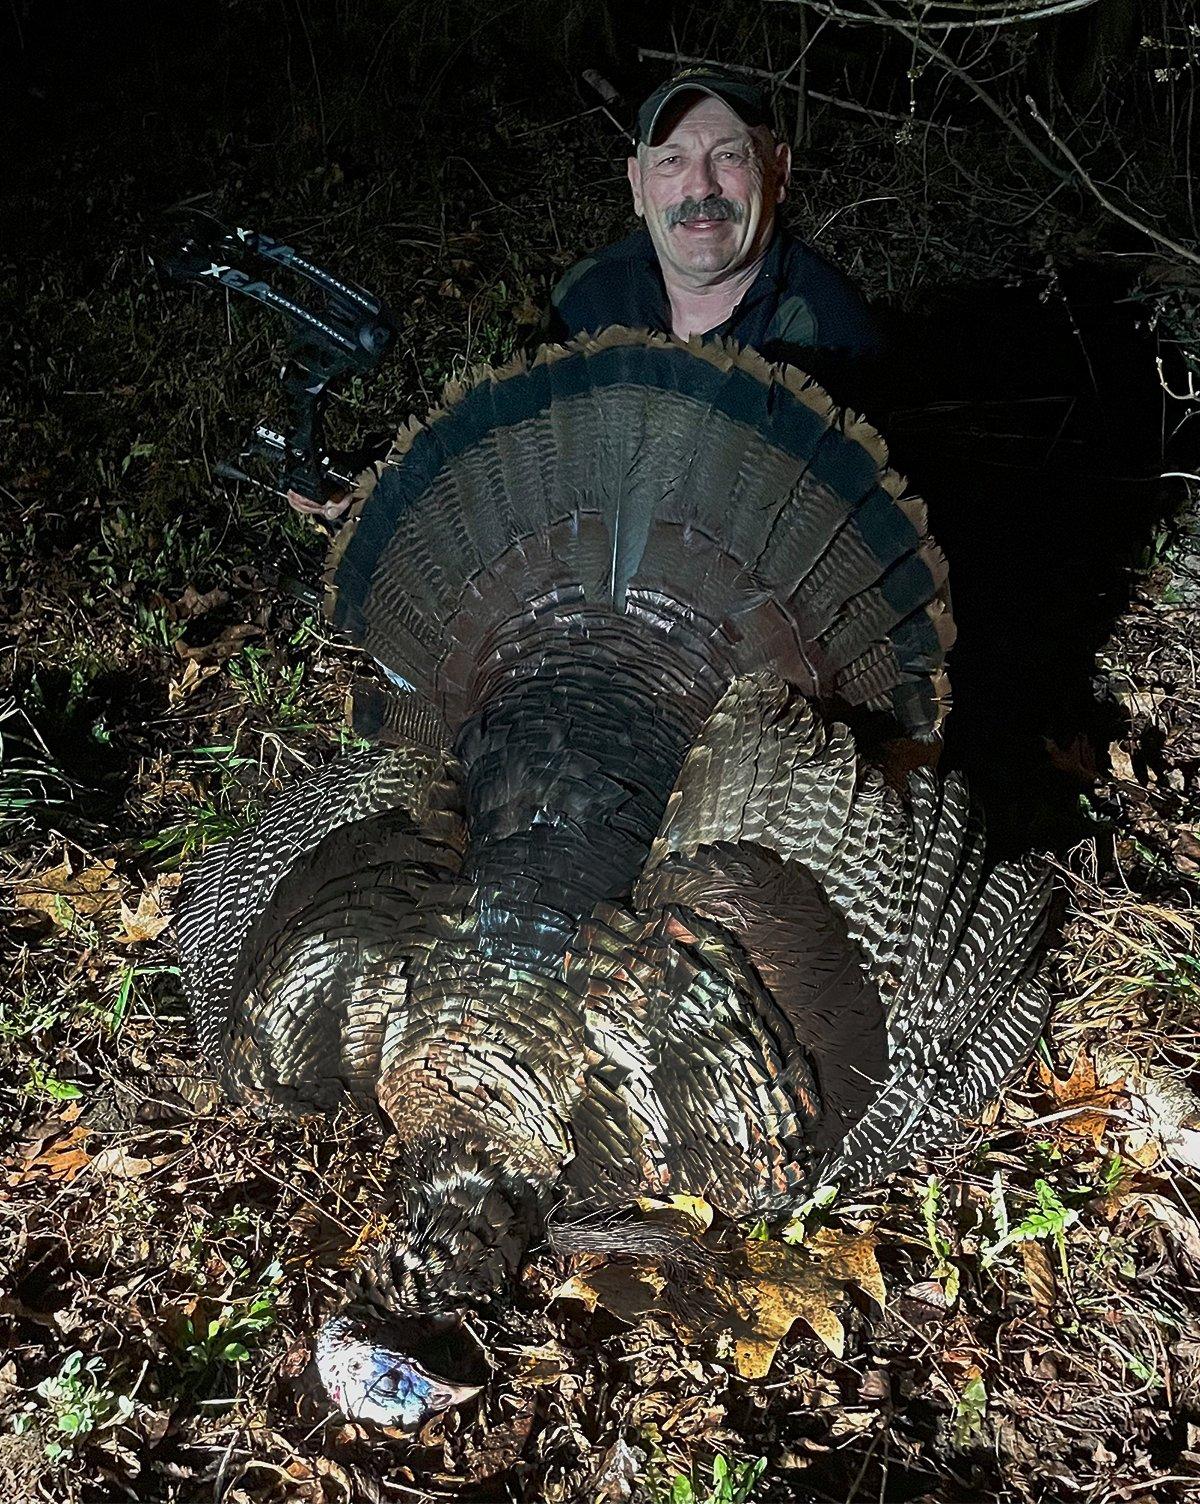 Last weekend, Kicking Bear's Ray Howell struck out to a turkey blind and anchored this Minnesota gobbler with a well-placed arrow. Image courtesy of Ray Howell